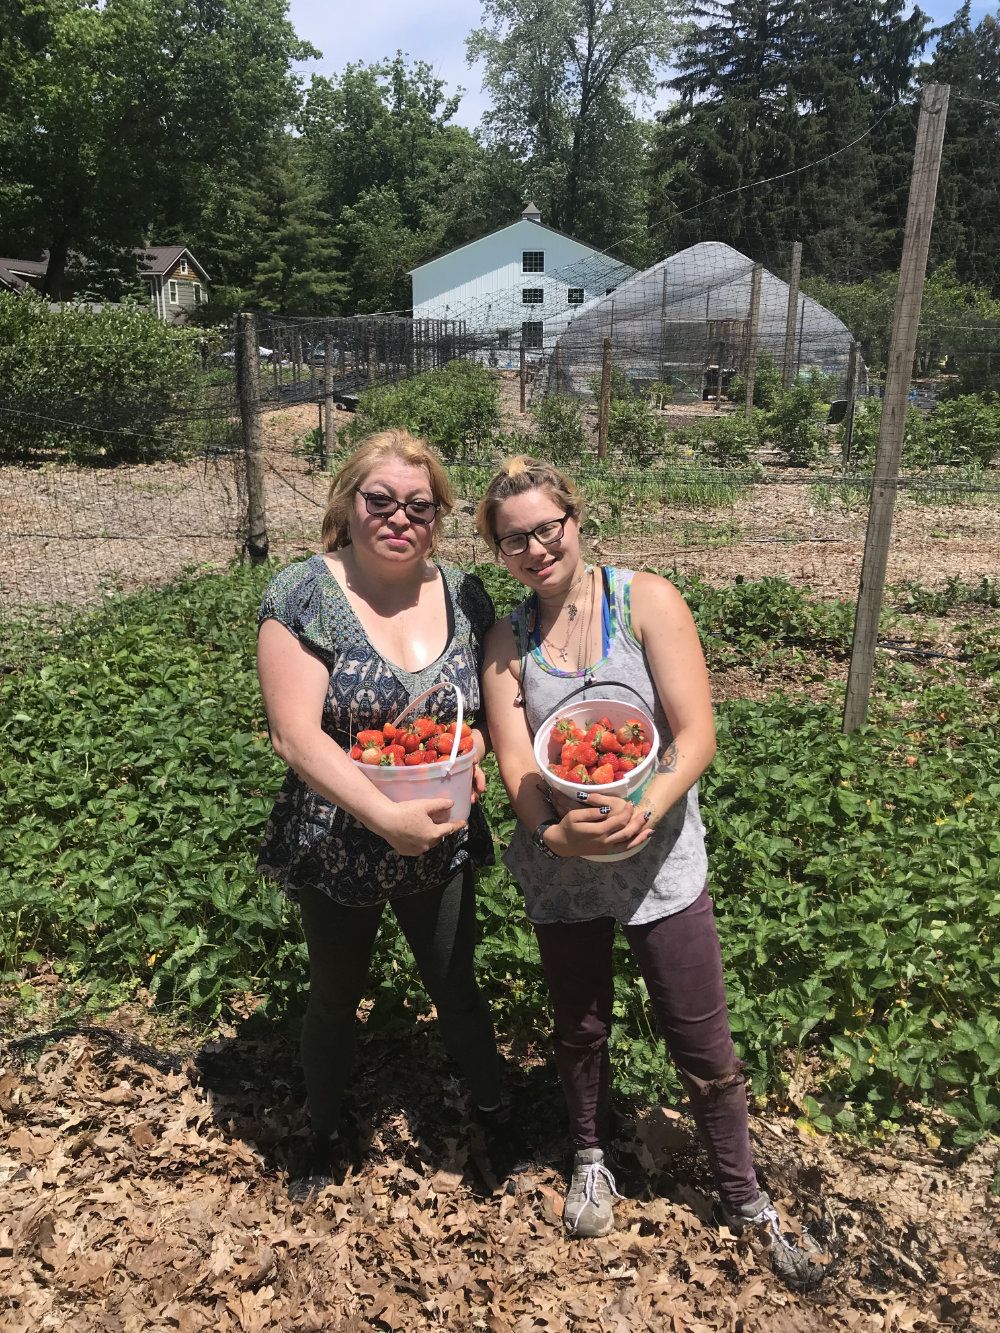 Two beautiful staff members pose for a picture while holding buckets of freshly picked strawberries